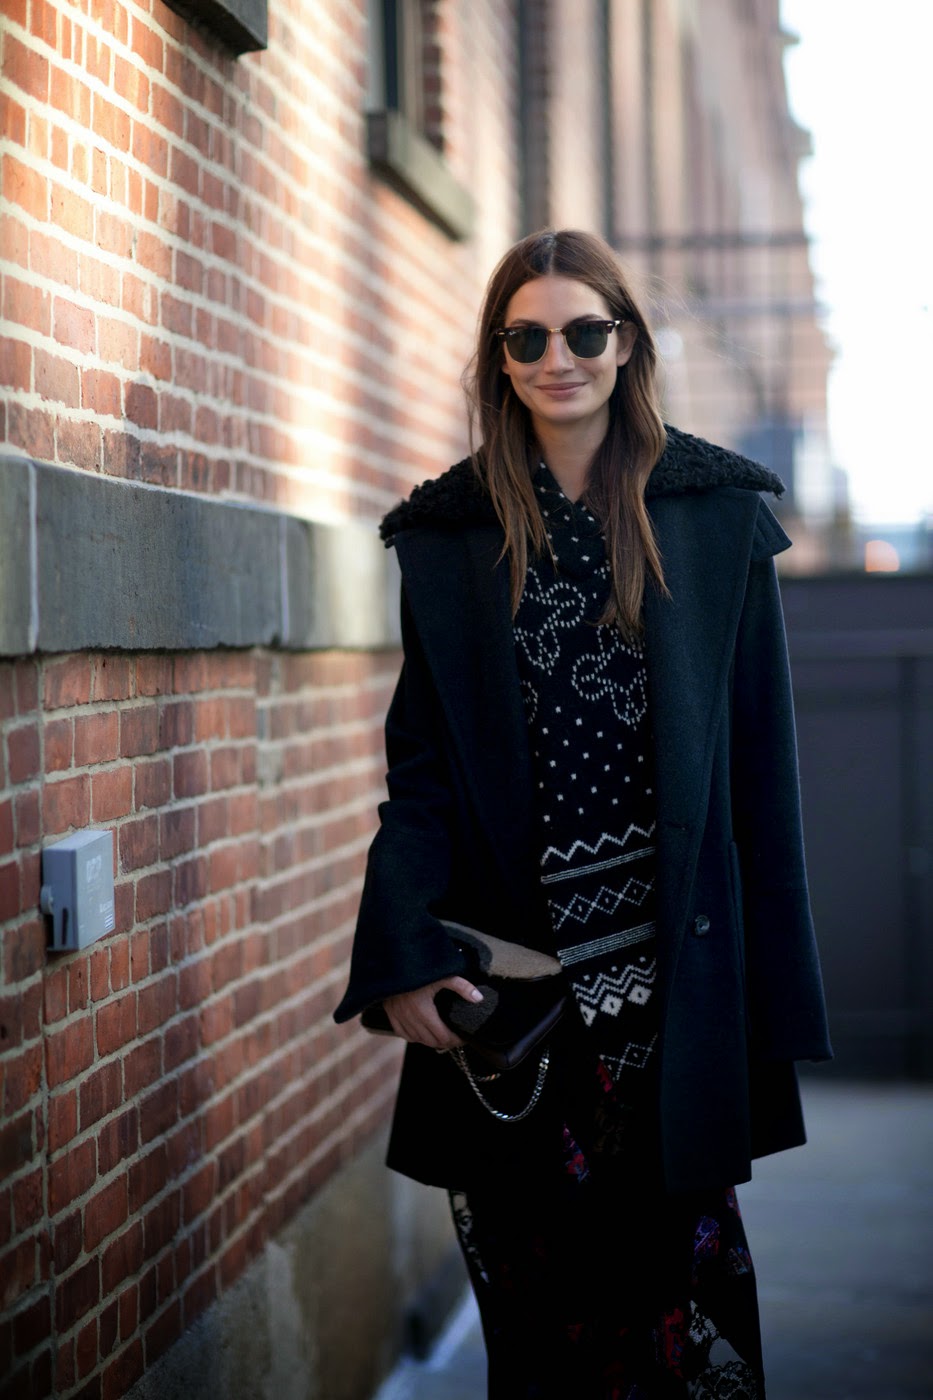 Model Street Style: Lily Aldridge Arrives at NYFW - The Front Row View